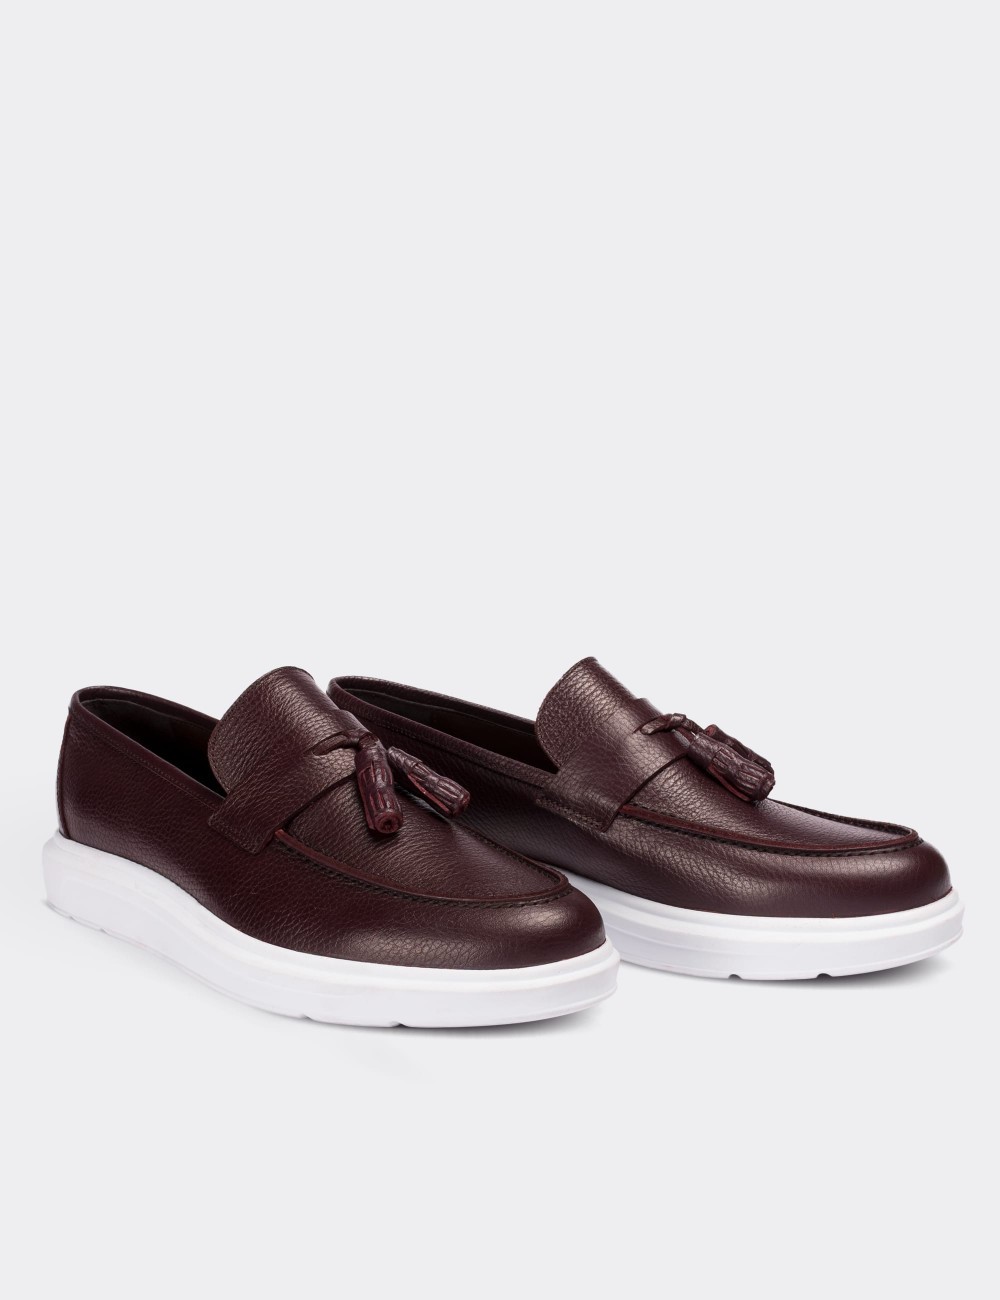 Burgundy  Leather Loafers & Moccasins Shoes - 01587MBRDP02